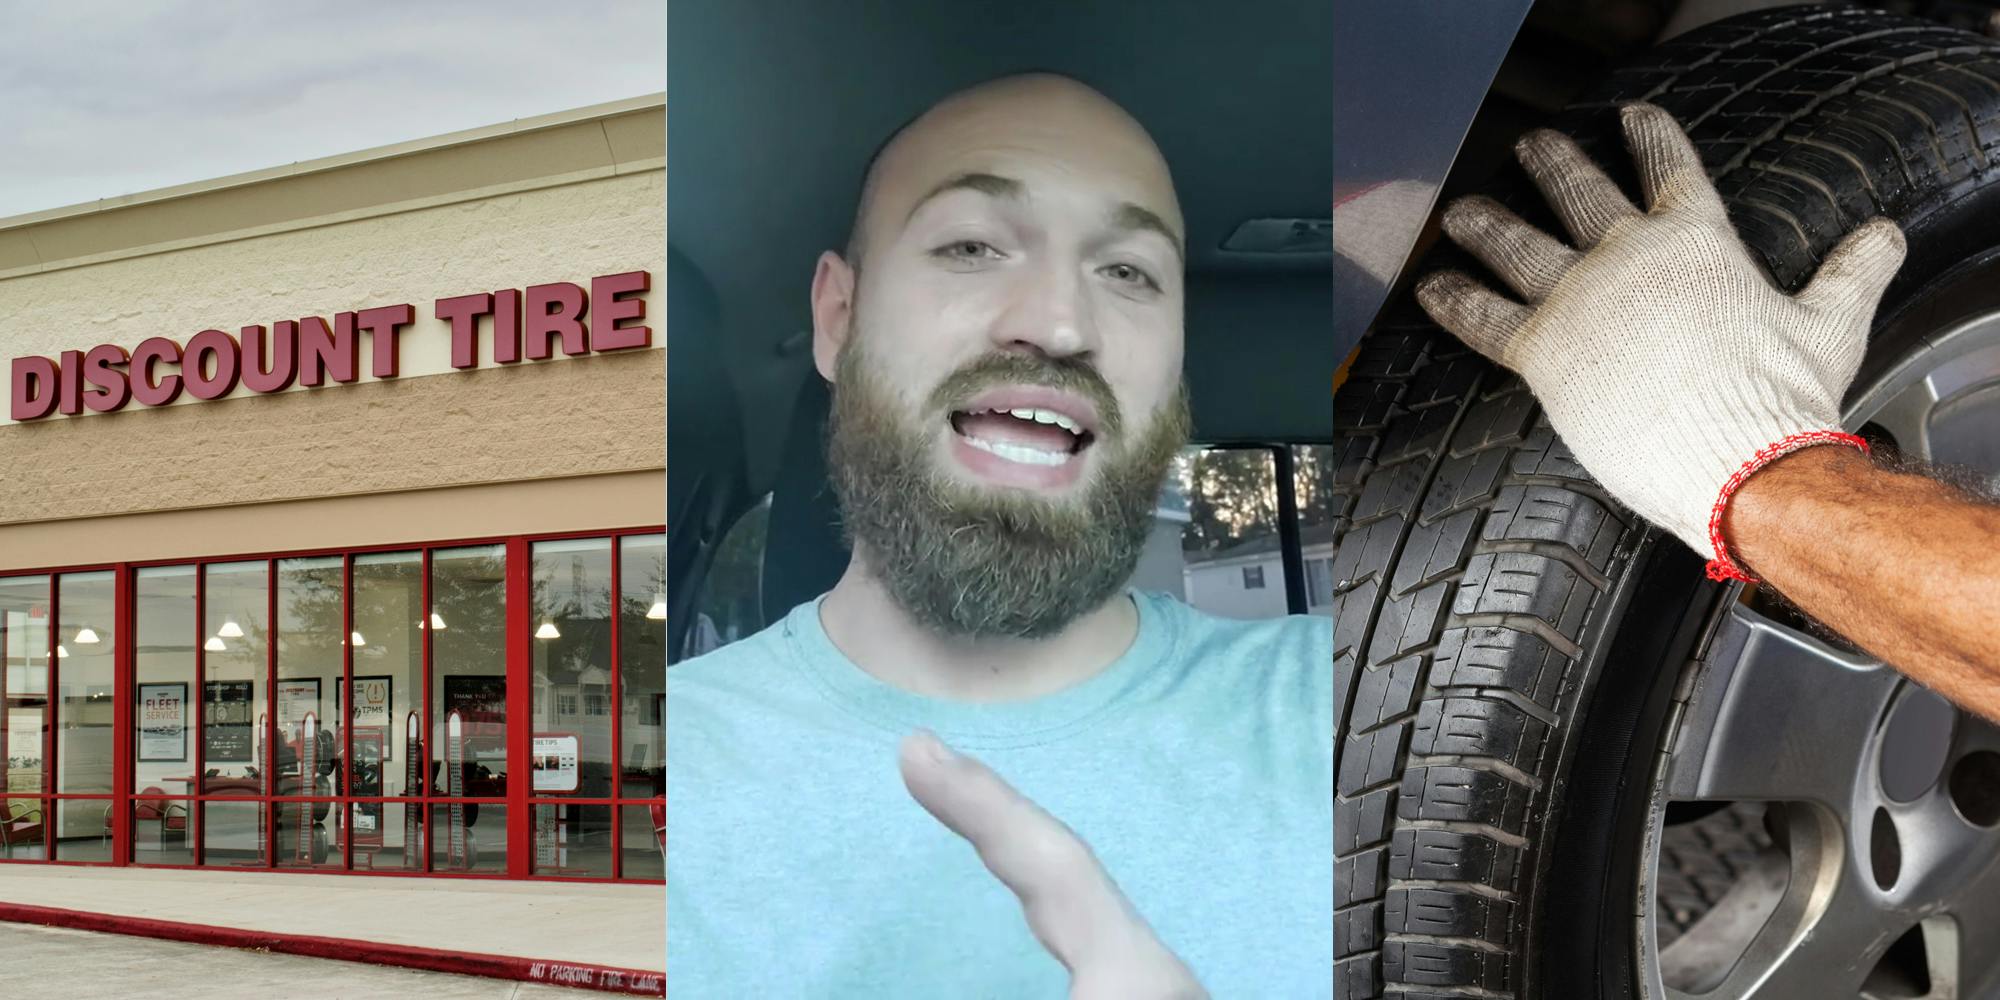 Discount Tire sign on building (l) former Discount Tire worker speaking in truck (c) mechanic hand on tire (r)